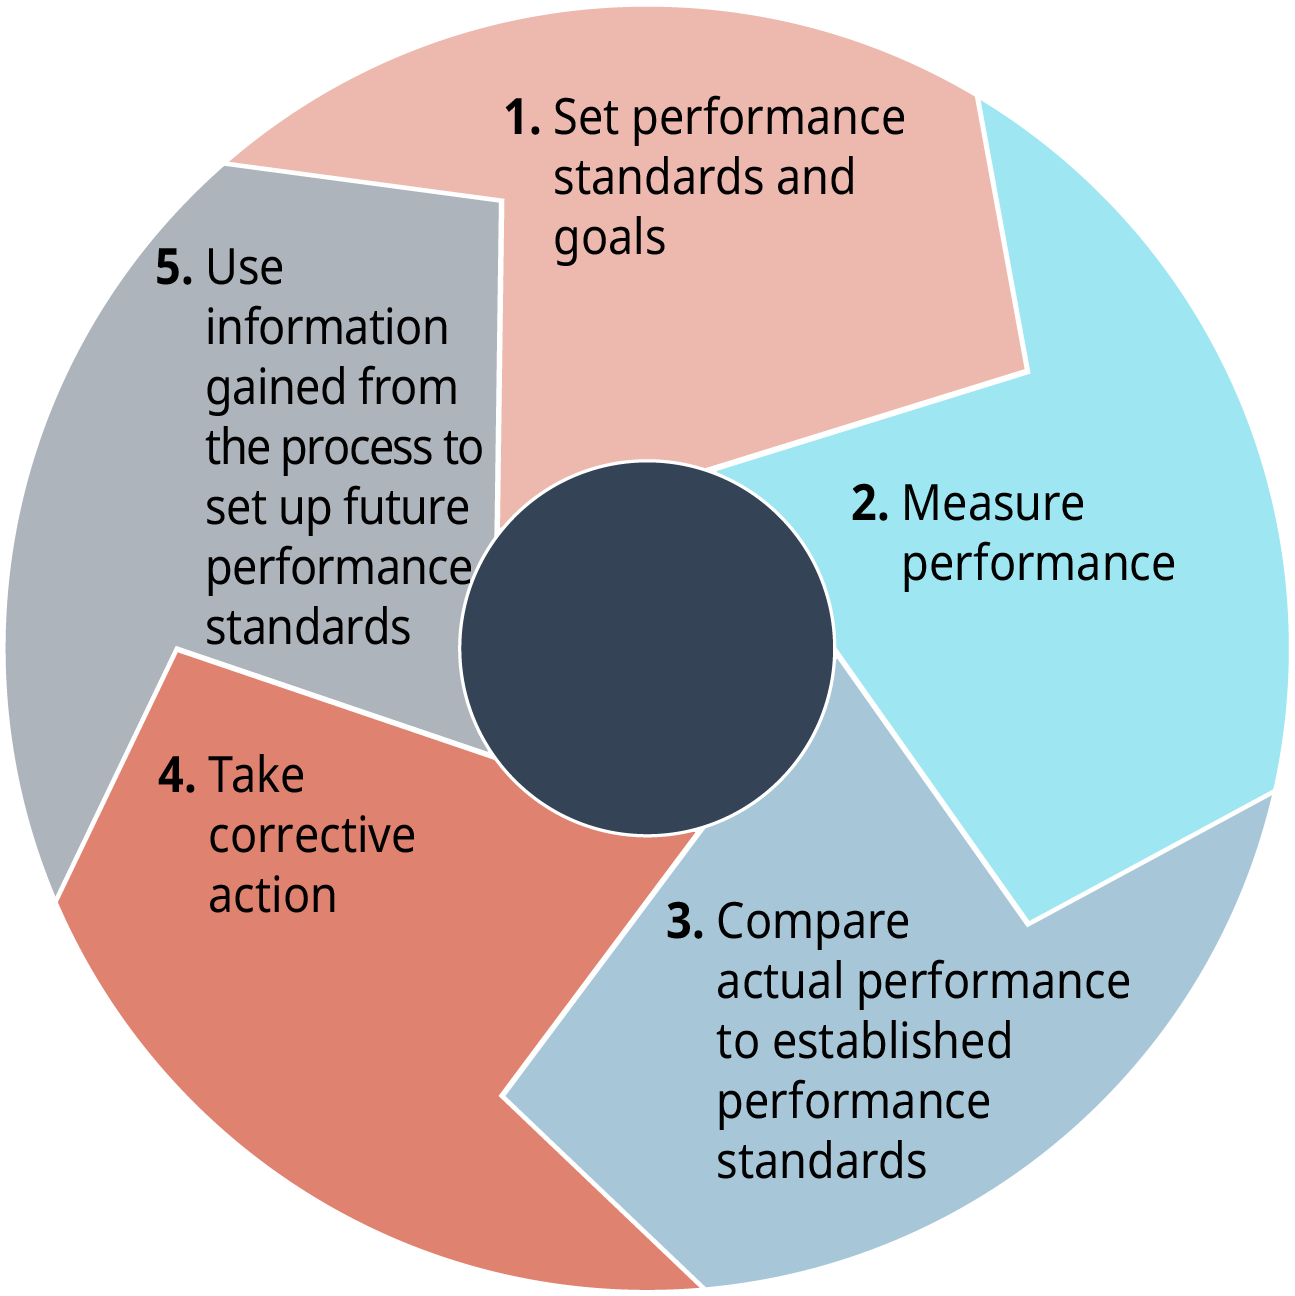 The Control Process is a cyclical process made up of five stages. Stage 1: Set performance standards and goals. Stage 2: Measure performance. Stage 3: Compare actual performance to established performance standards. Stage 4: Take corrective action. Stage 5: Use information gained from the process to set up future performance standards.